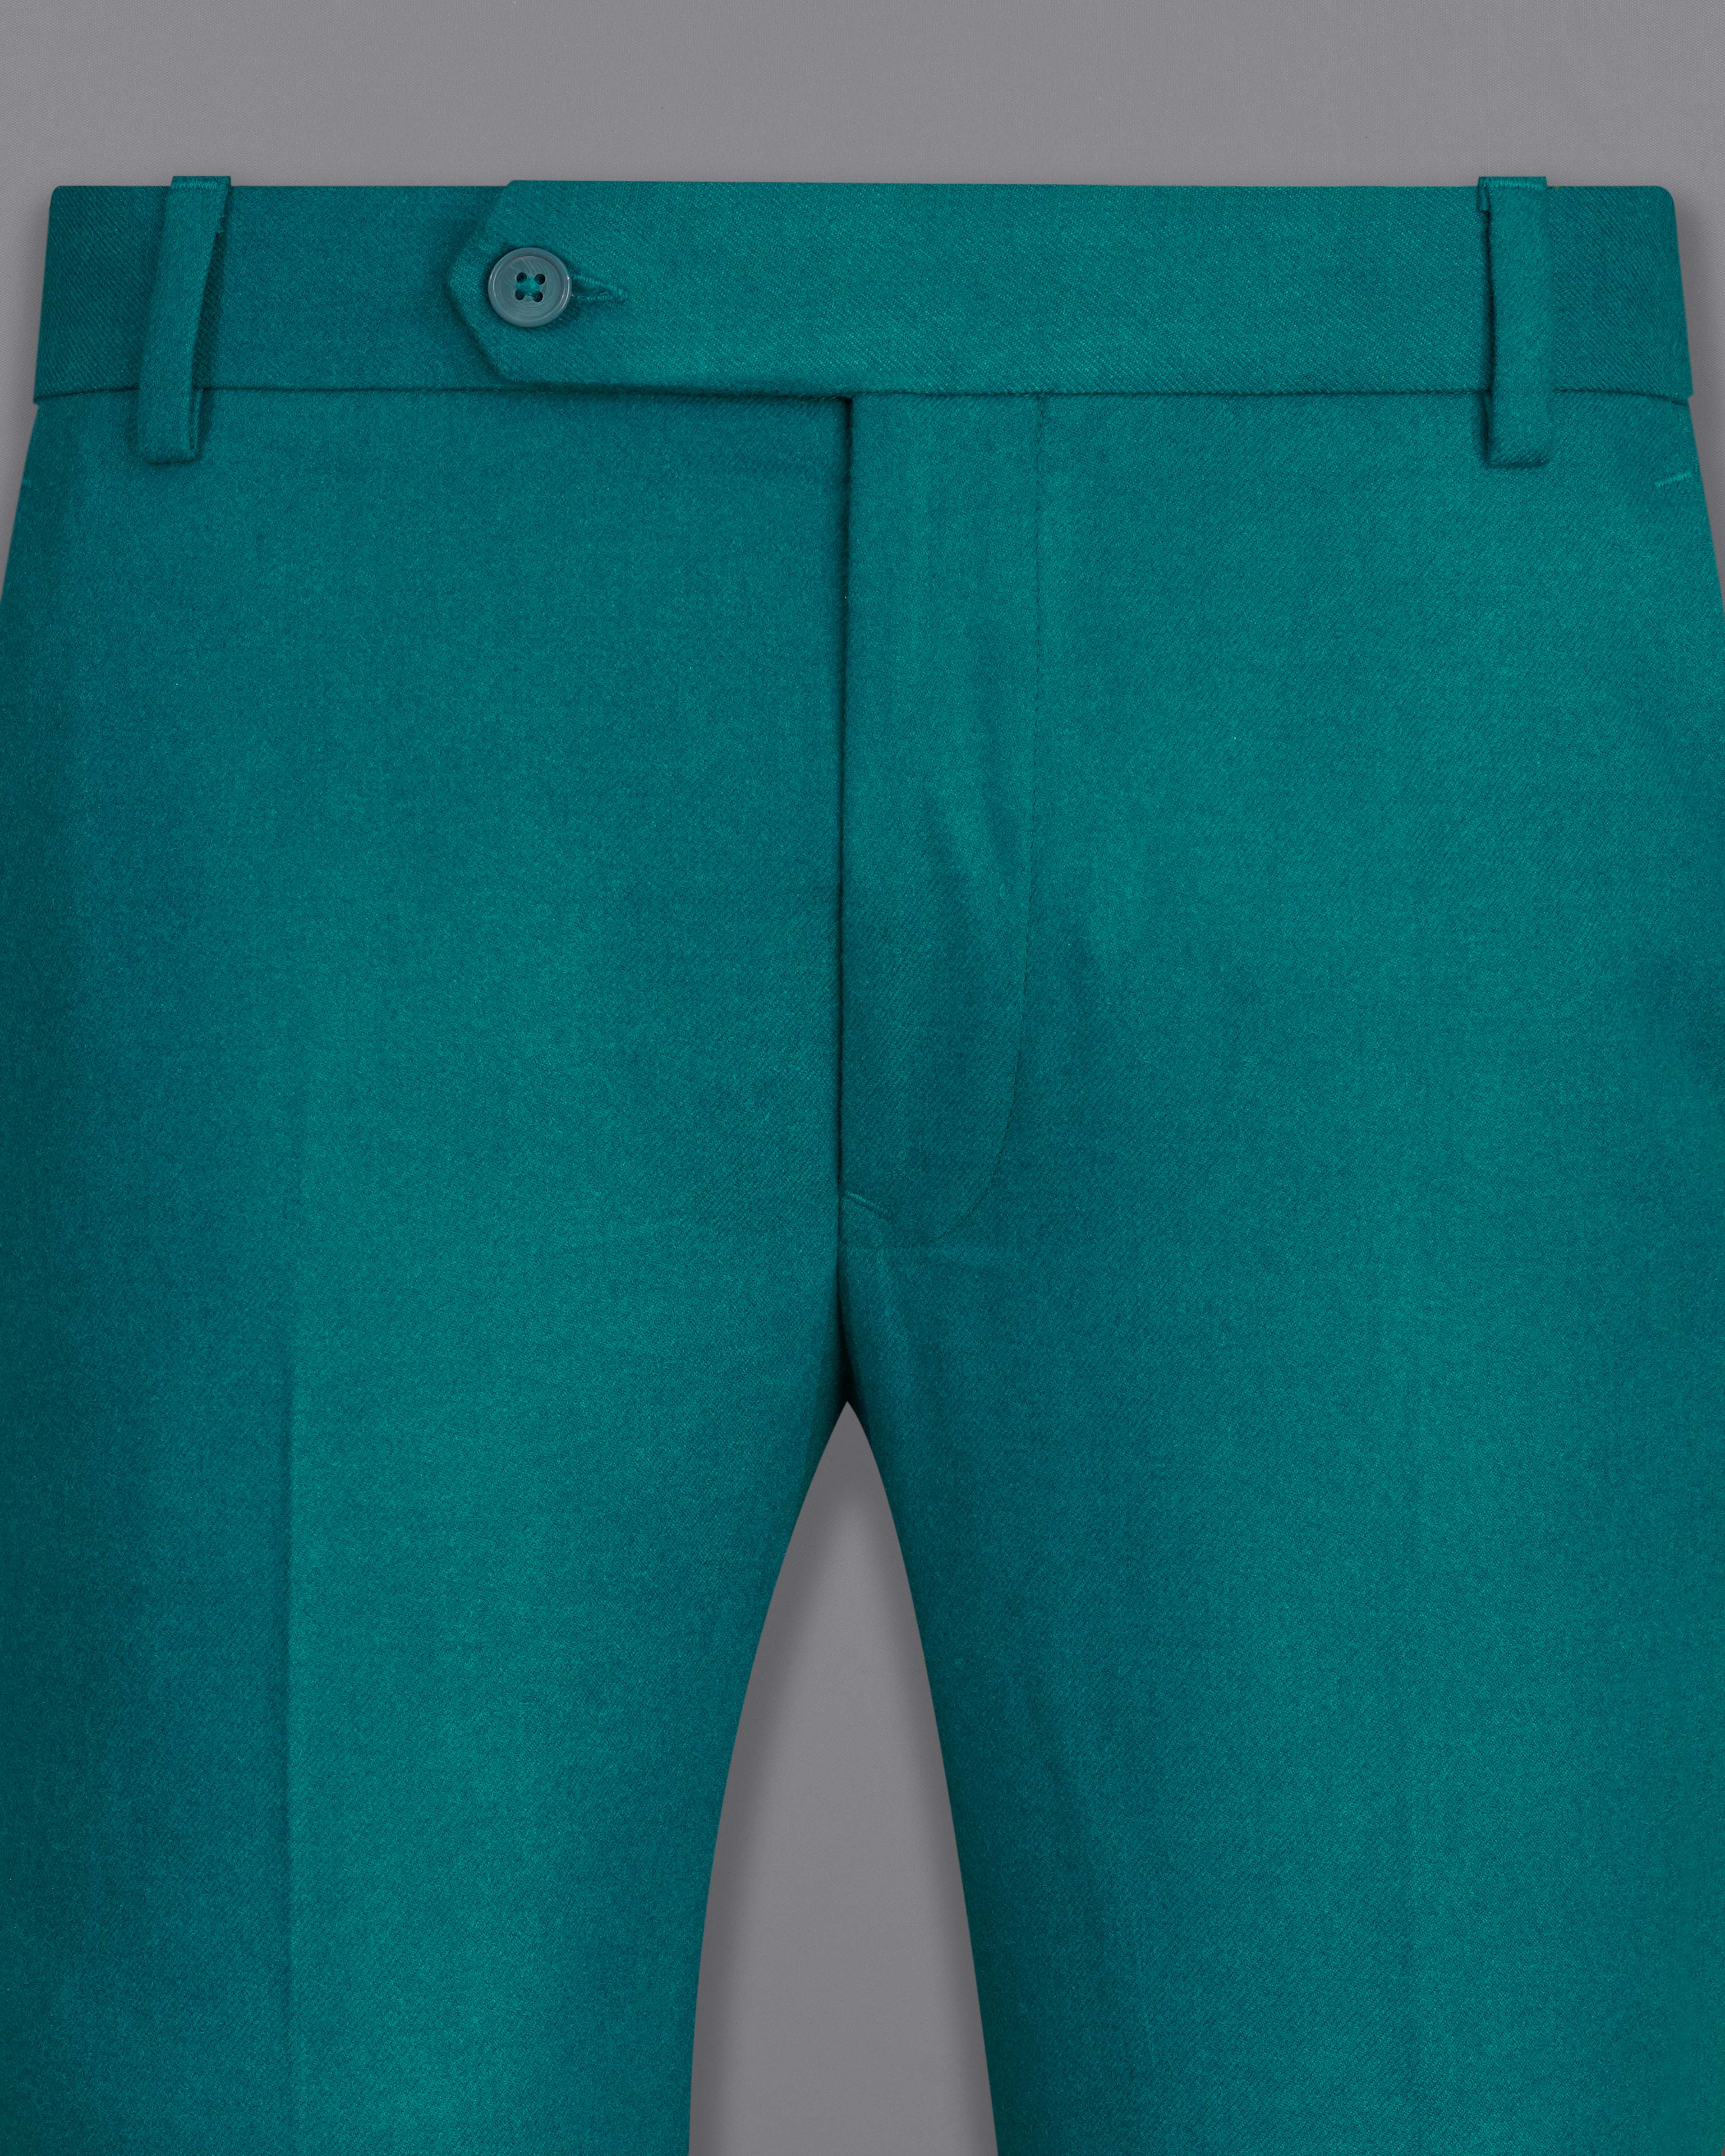 Turquoise Pure Wool Textured Pant T2068-28, T2068-30, T2068-32, T2068-34, T2068-36, T2068-38, T2068-40, T2068-42, T2068-44